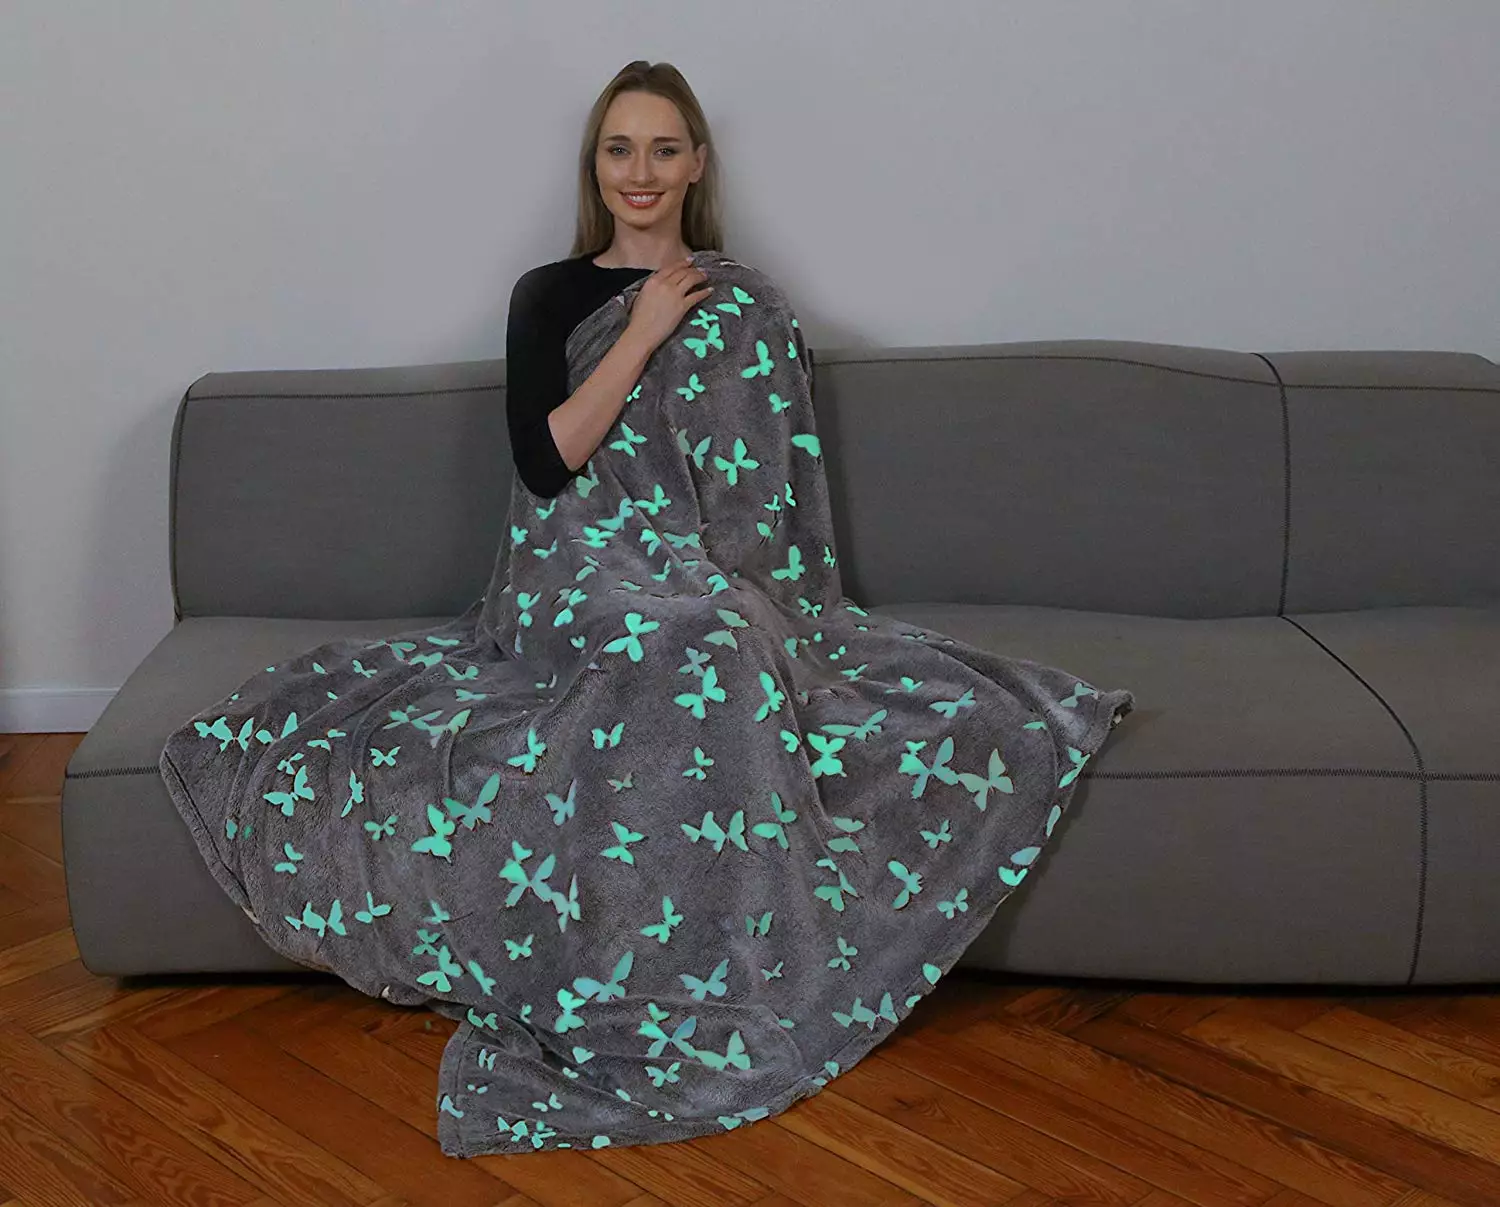 If you or your child is more of a butterfly person, this sweet throw also glows in the dark and costs £20.28. (